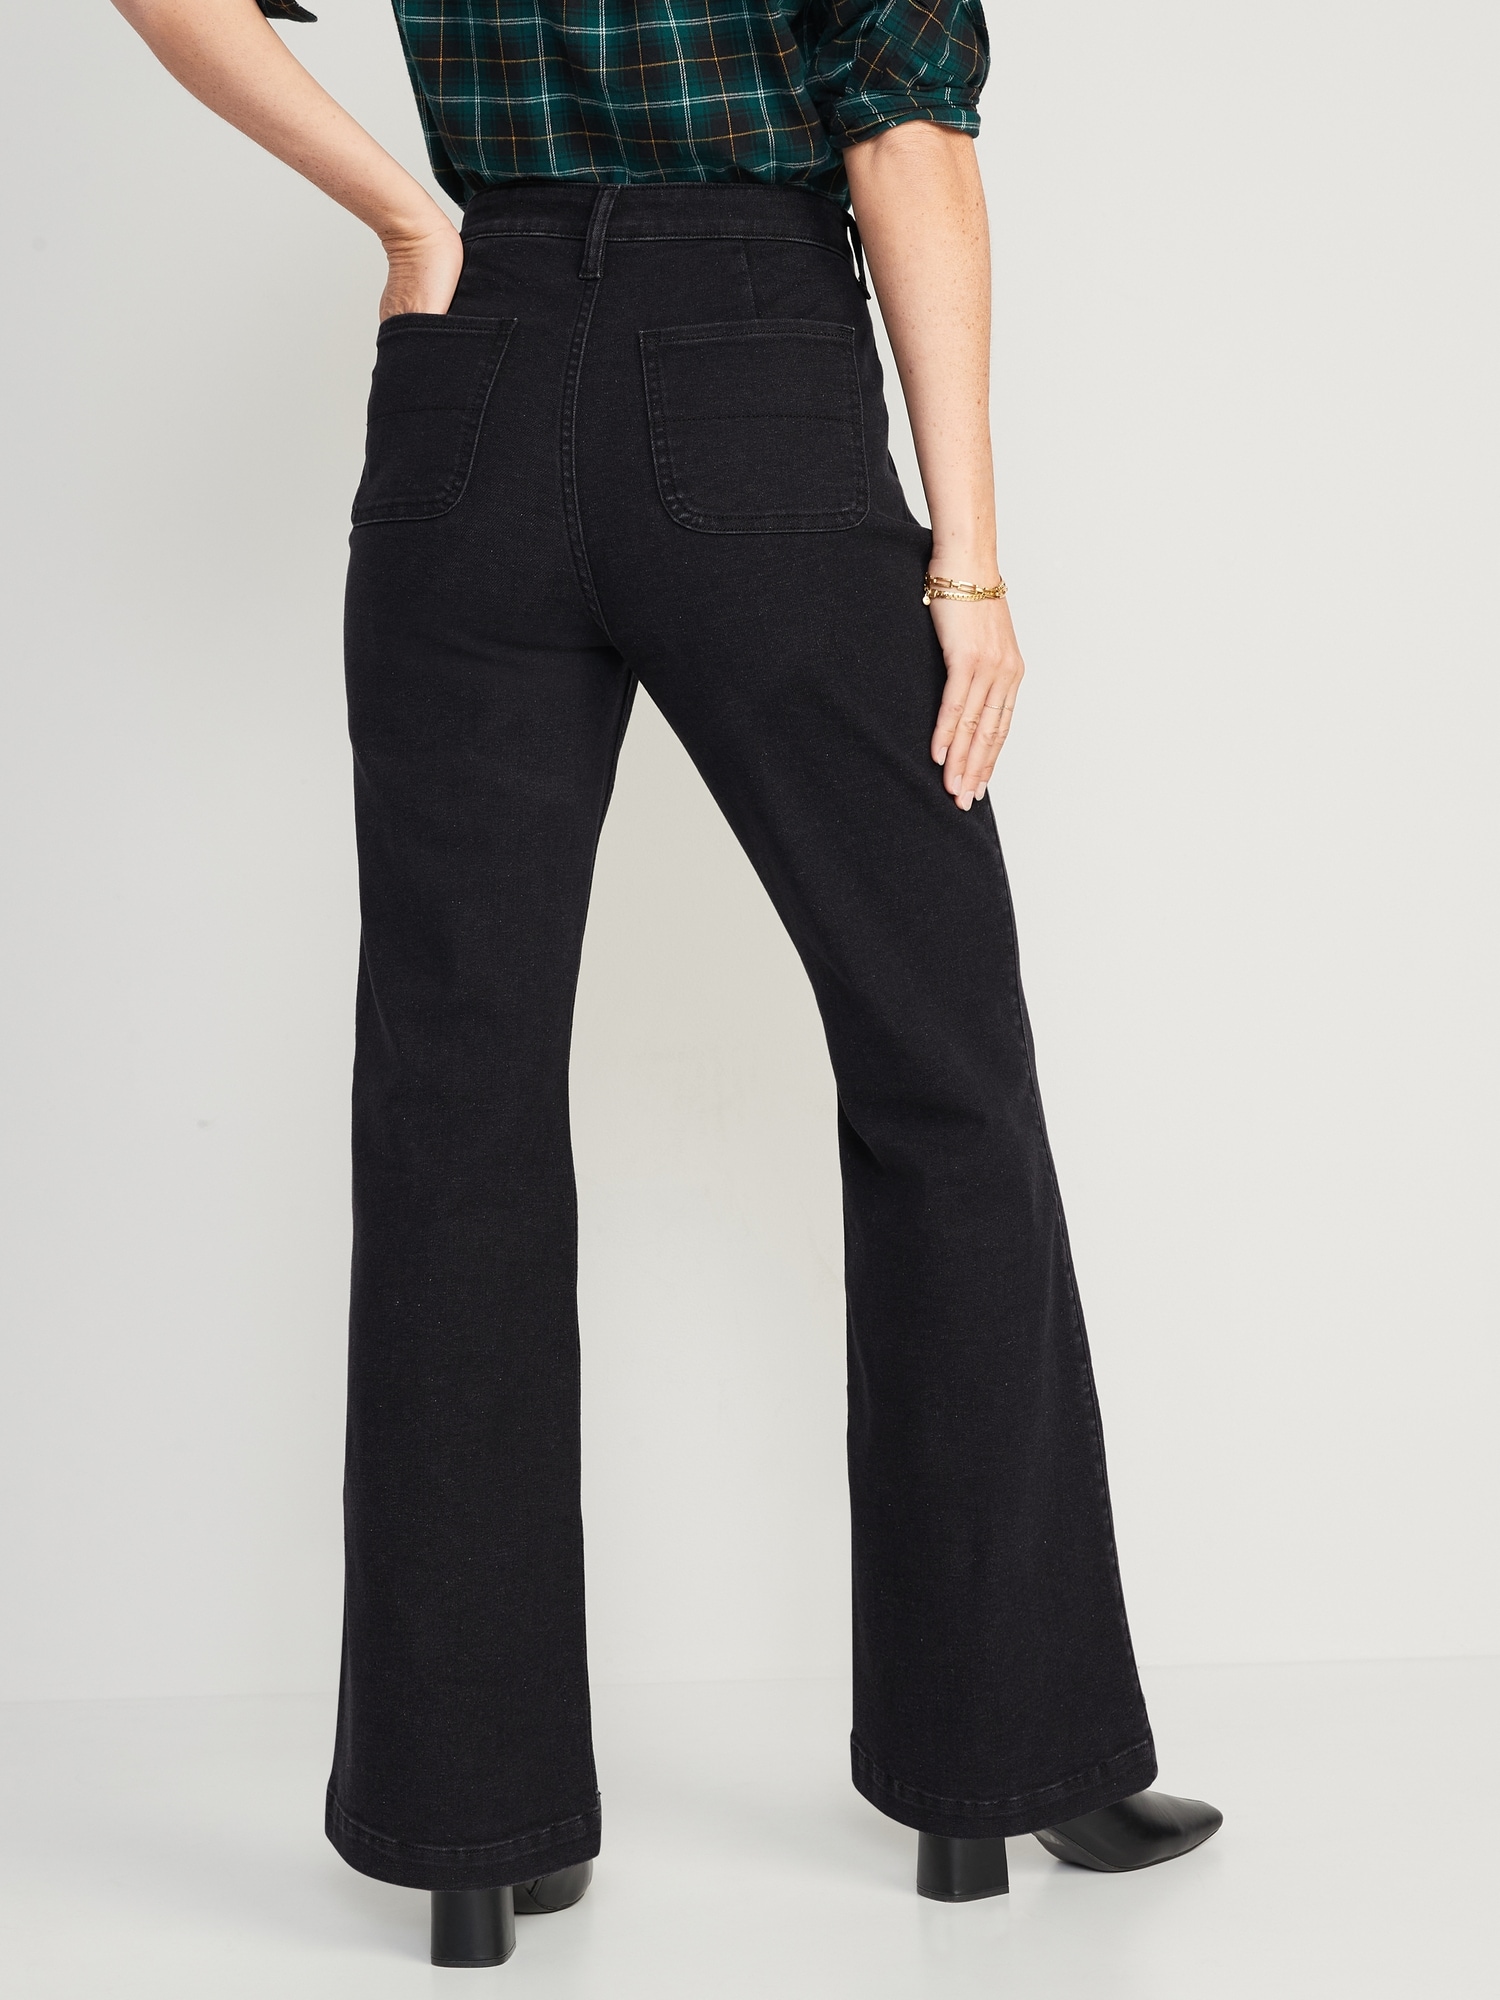 Extra High-Waisted 360° Stretch Black Trouser Flare Jeans for Women